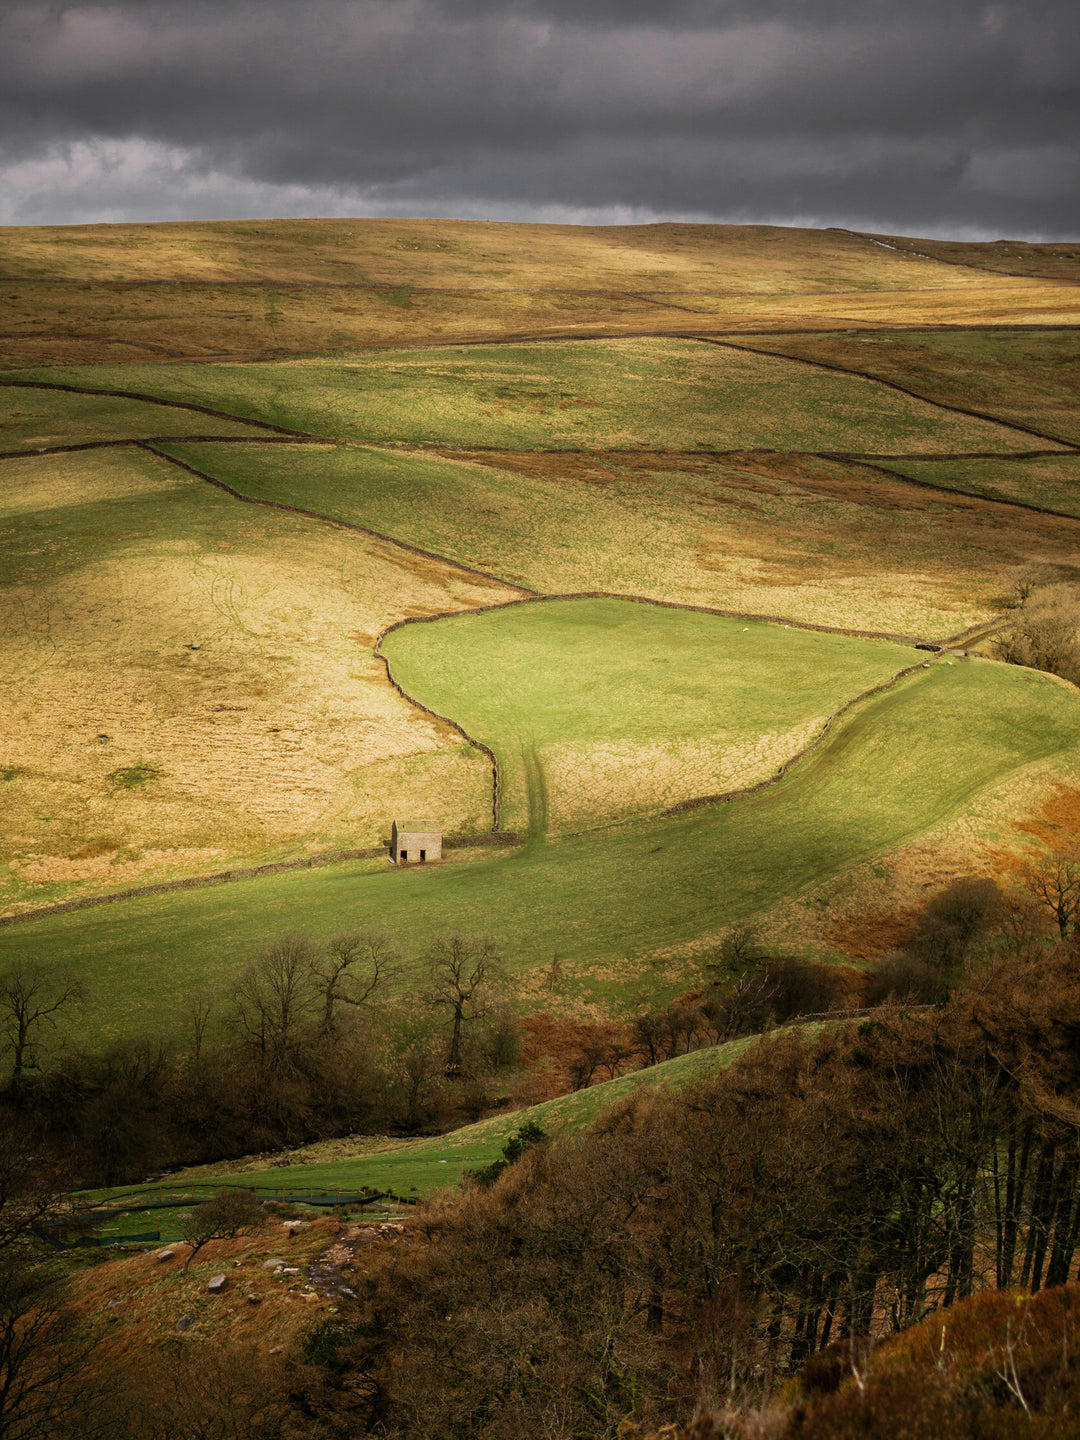 The Green hills of the Yorkshire Dales Photo Print - Canvas - Framed Photo Print - Hampshire Prints